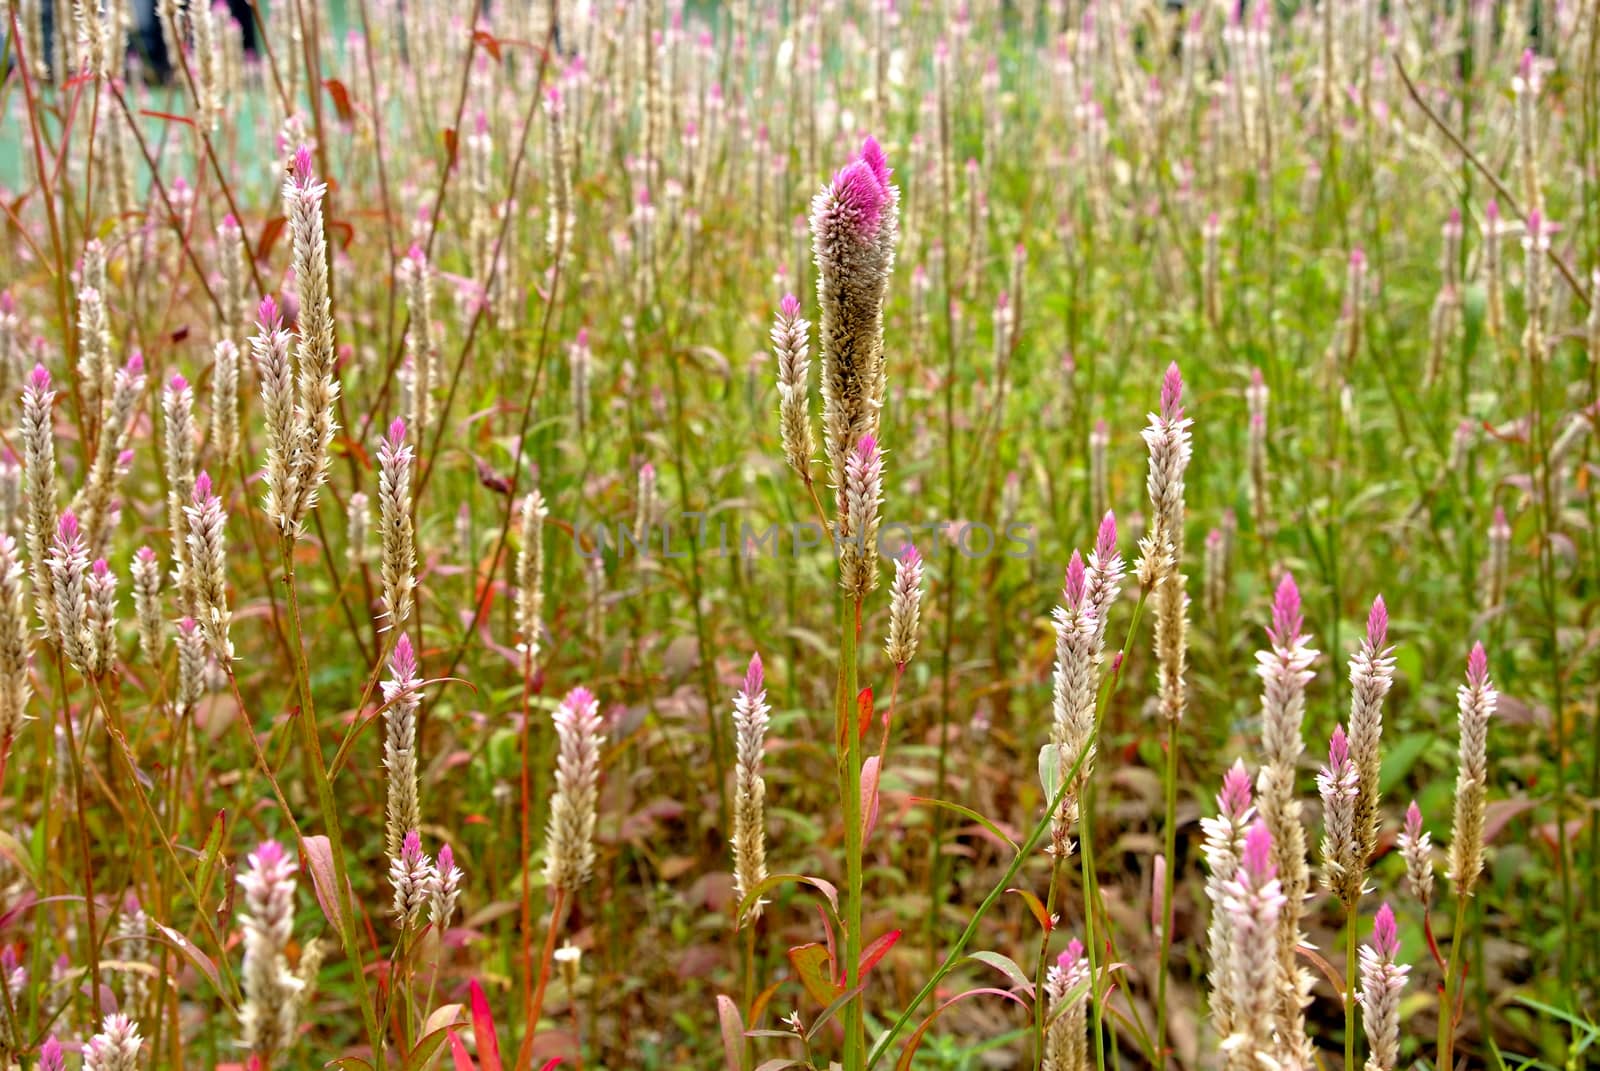 Soft focus of Liatris spicata, dense blazing star, prairie gay feather, note select focus center of picture with shallow depth of field